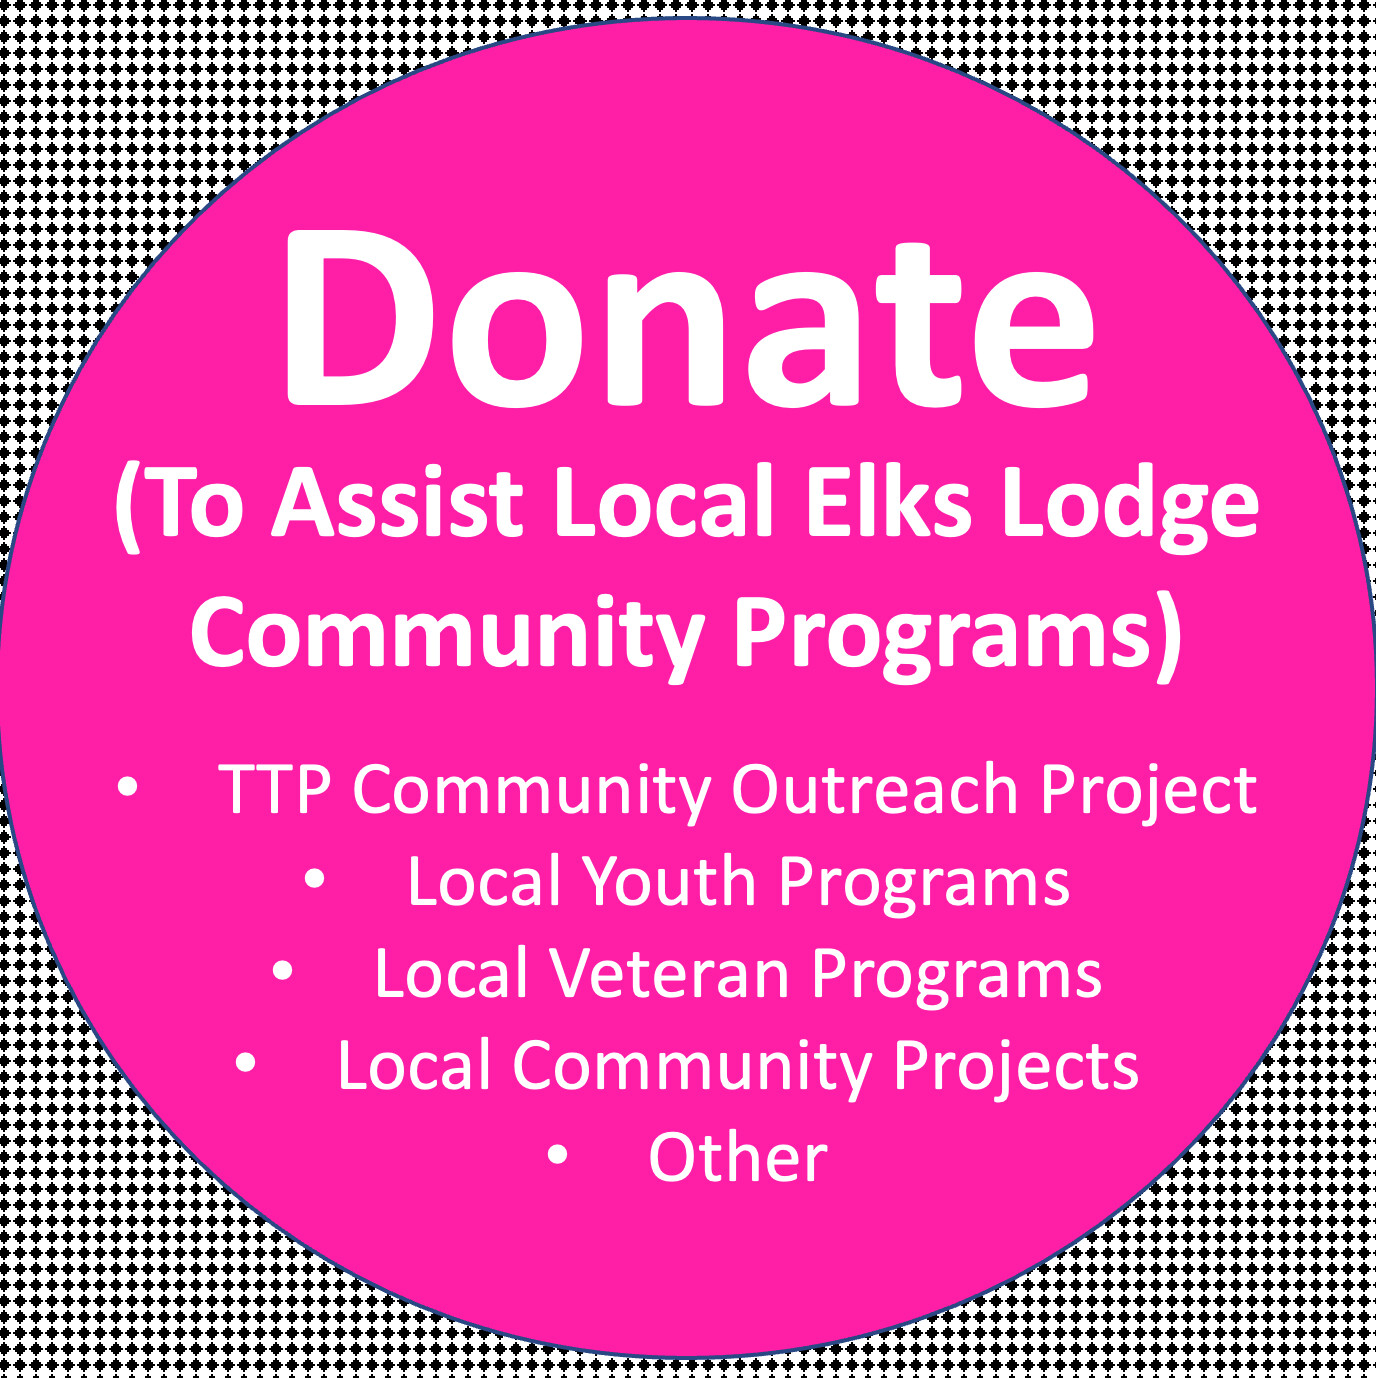 Help Your Local Lodge!